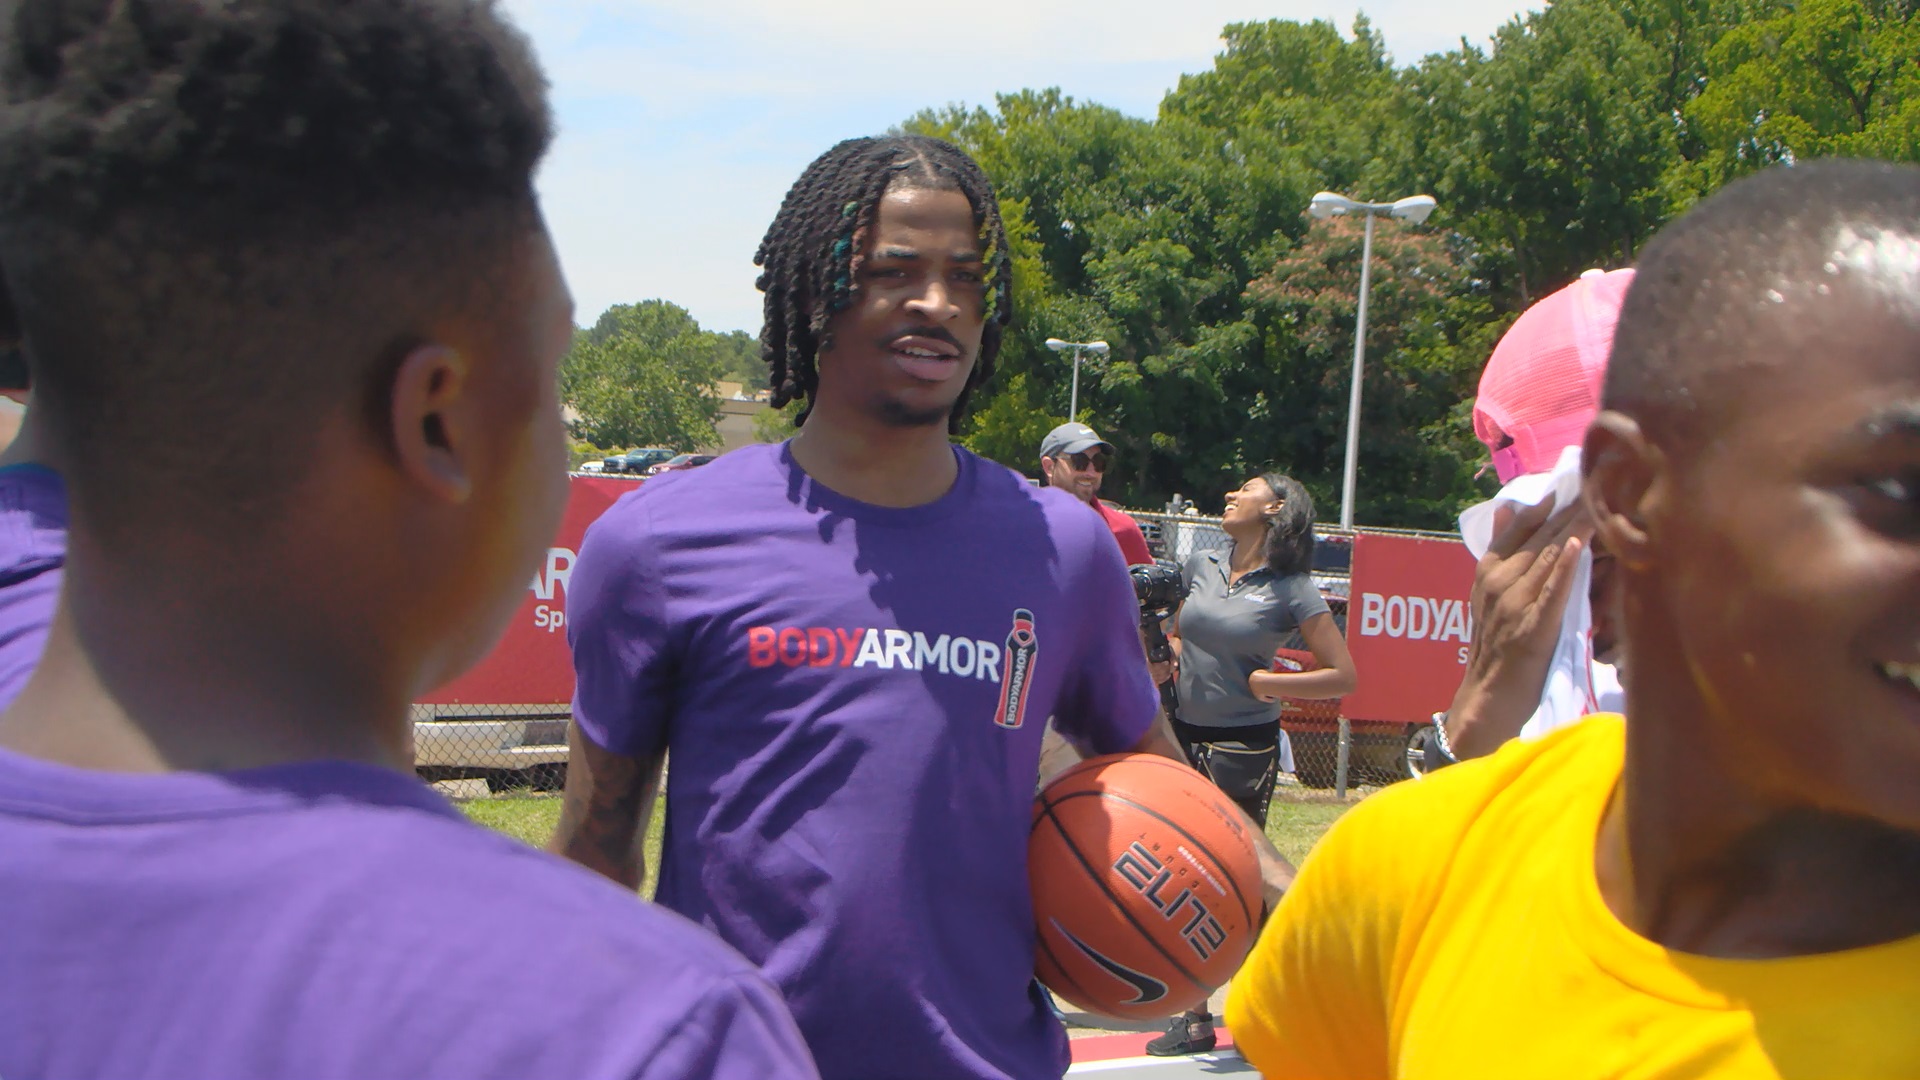 NBA Star Ja Morant and KK Dixon Serve as National Promise Walk Co-Chairs  for the Preeclampsia Foundation, Revealing Their Harrowing Birth Story